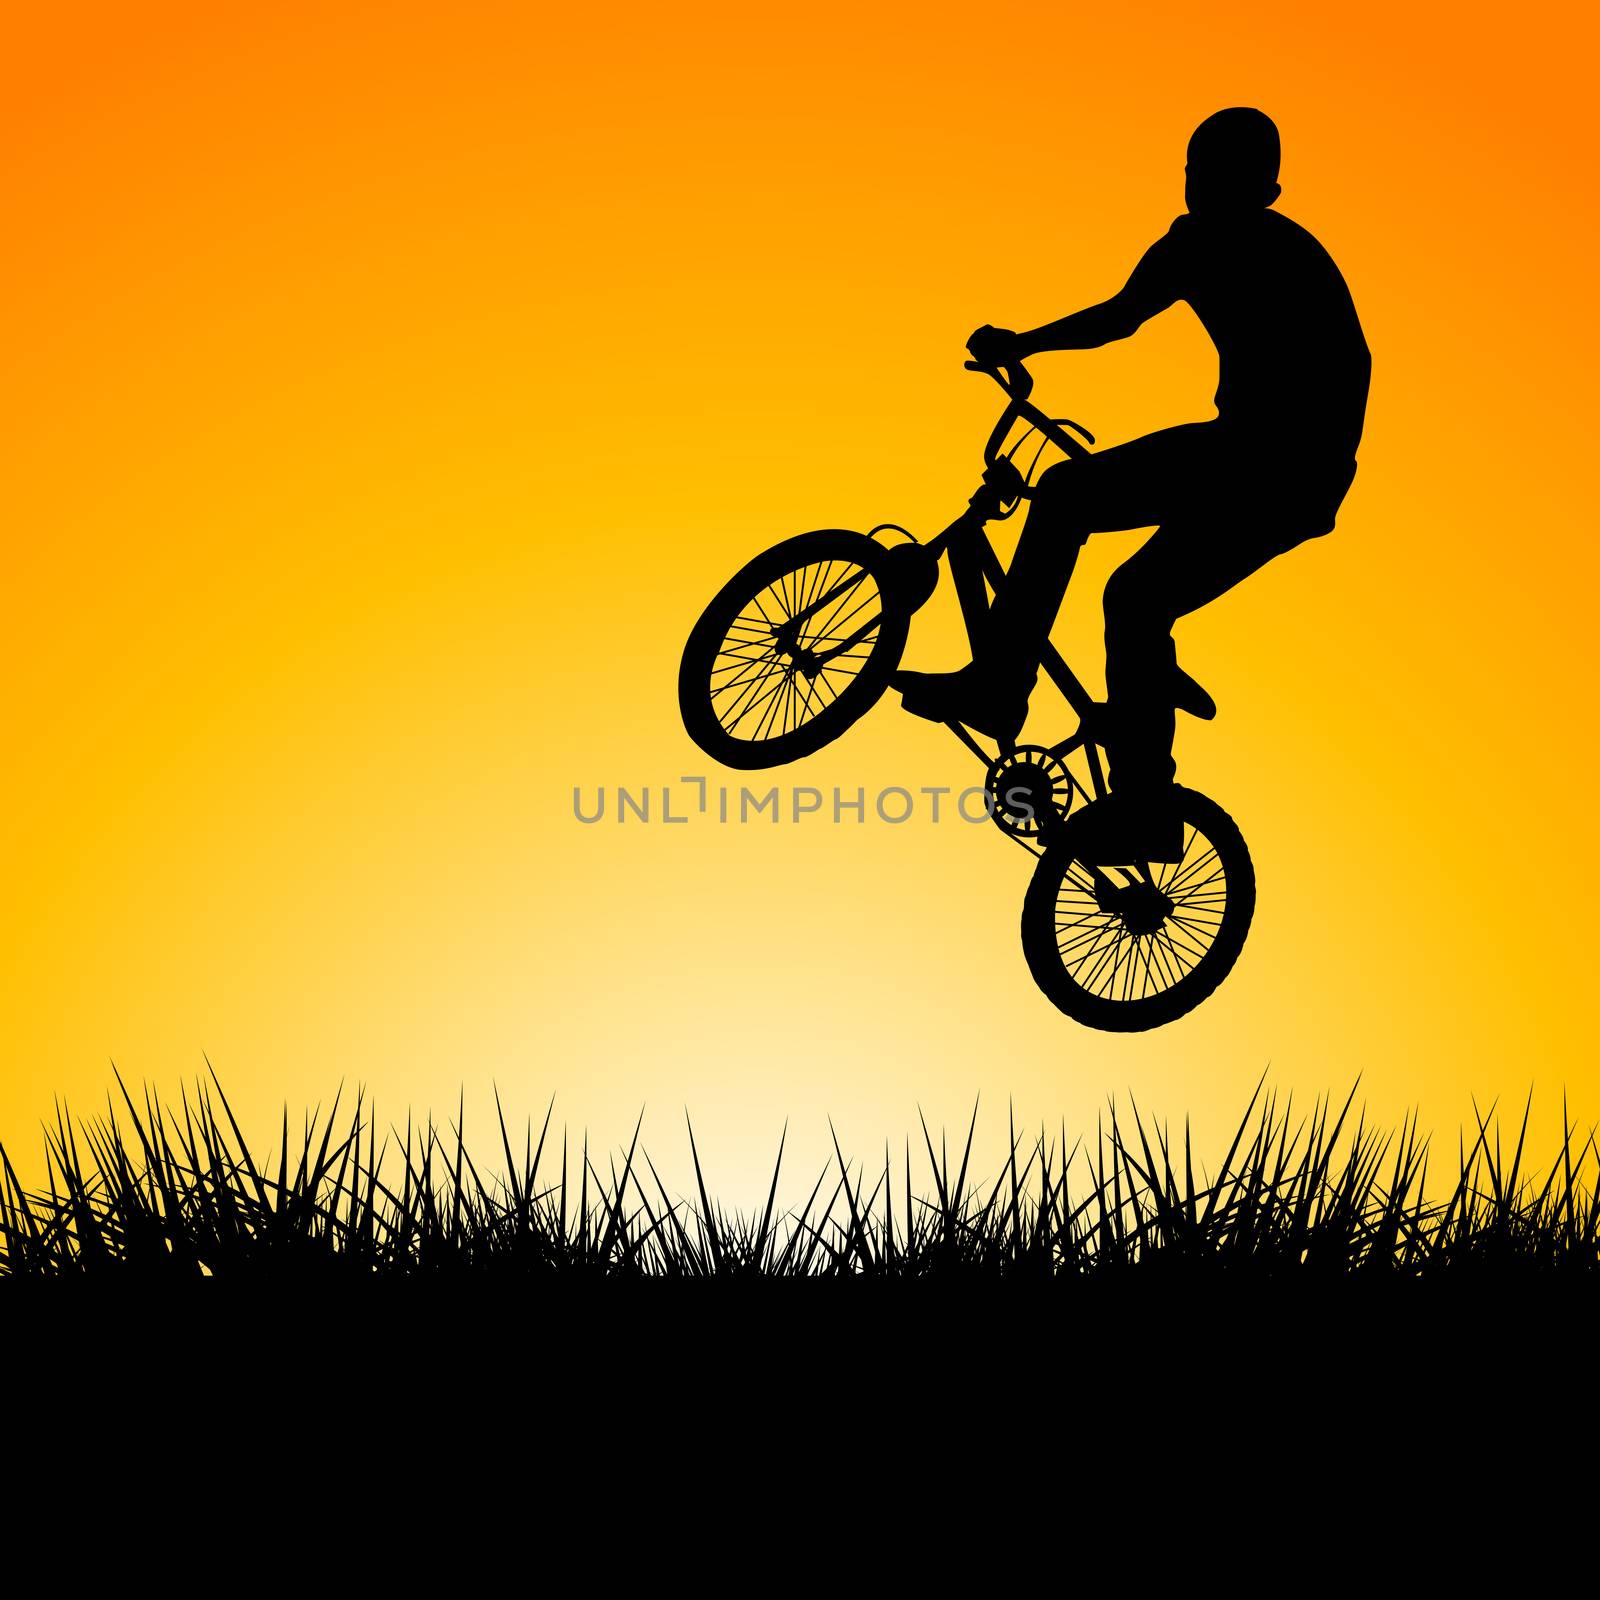 Silhouette of a biker jumping in the sunset by hibrida13